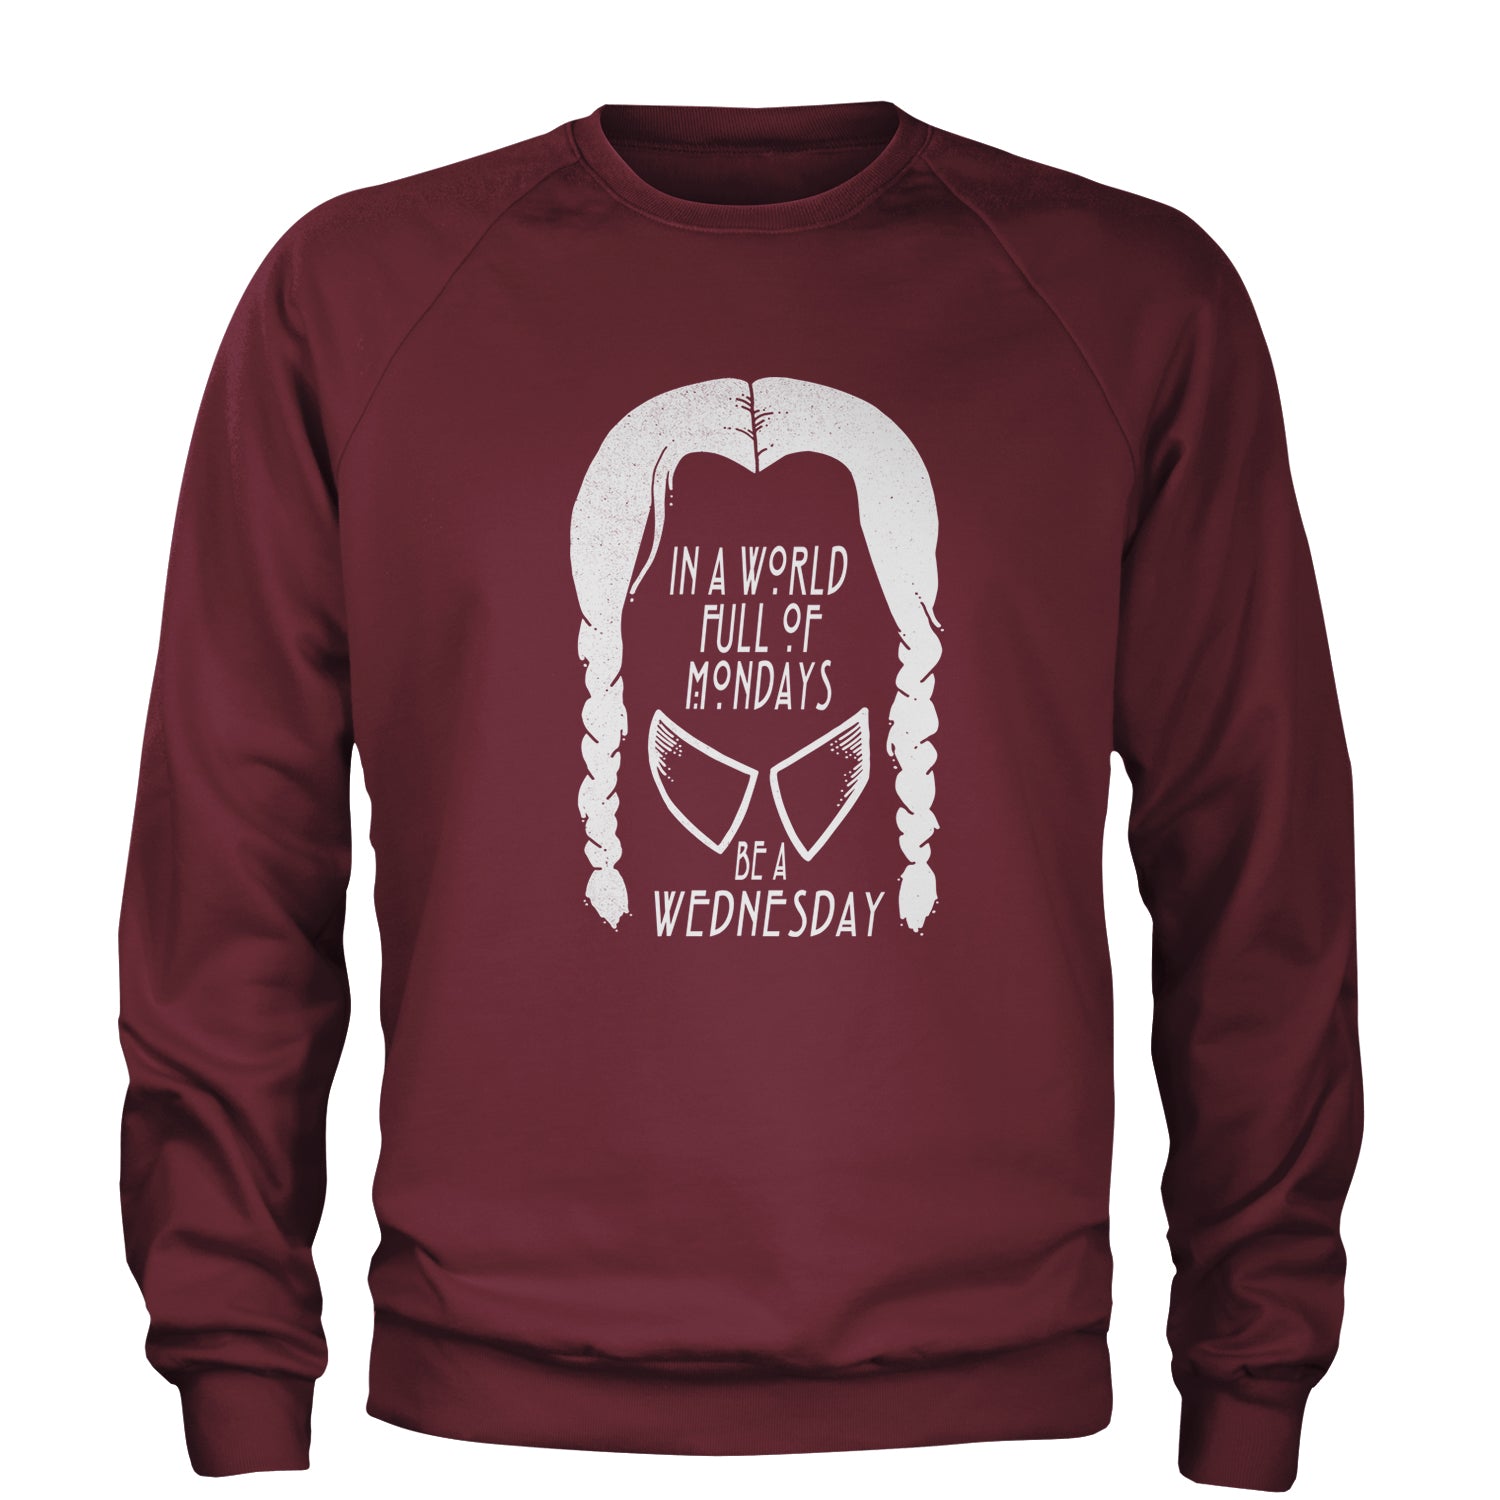 In A World Full Of Mondays, Be A Wednesday Adult Crewneck Sweatshirt academy, jericho, more, never, nevermore, vermont, Wednesday by Expression Tees